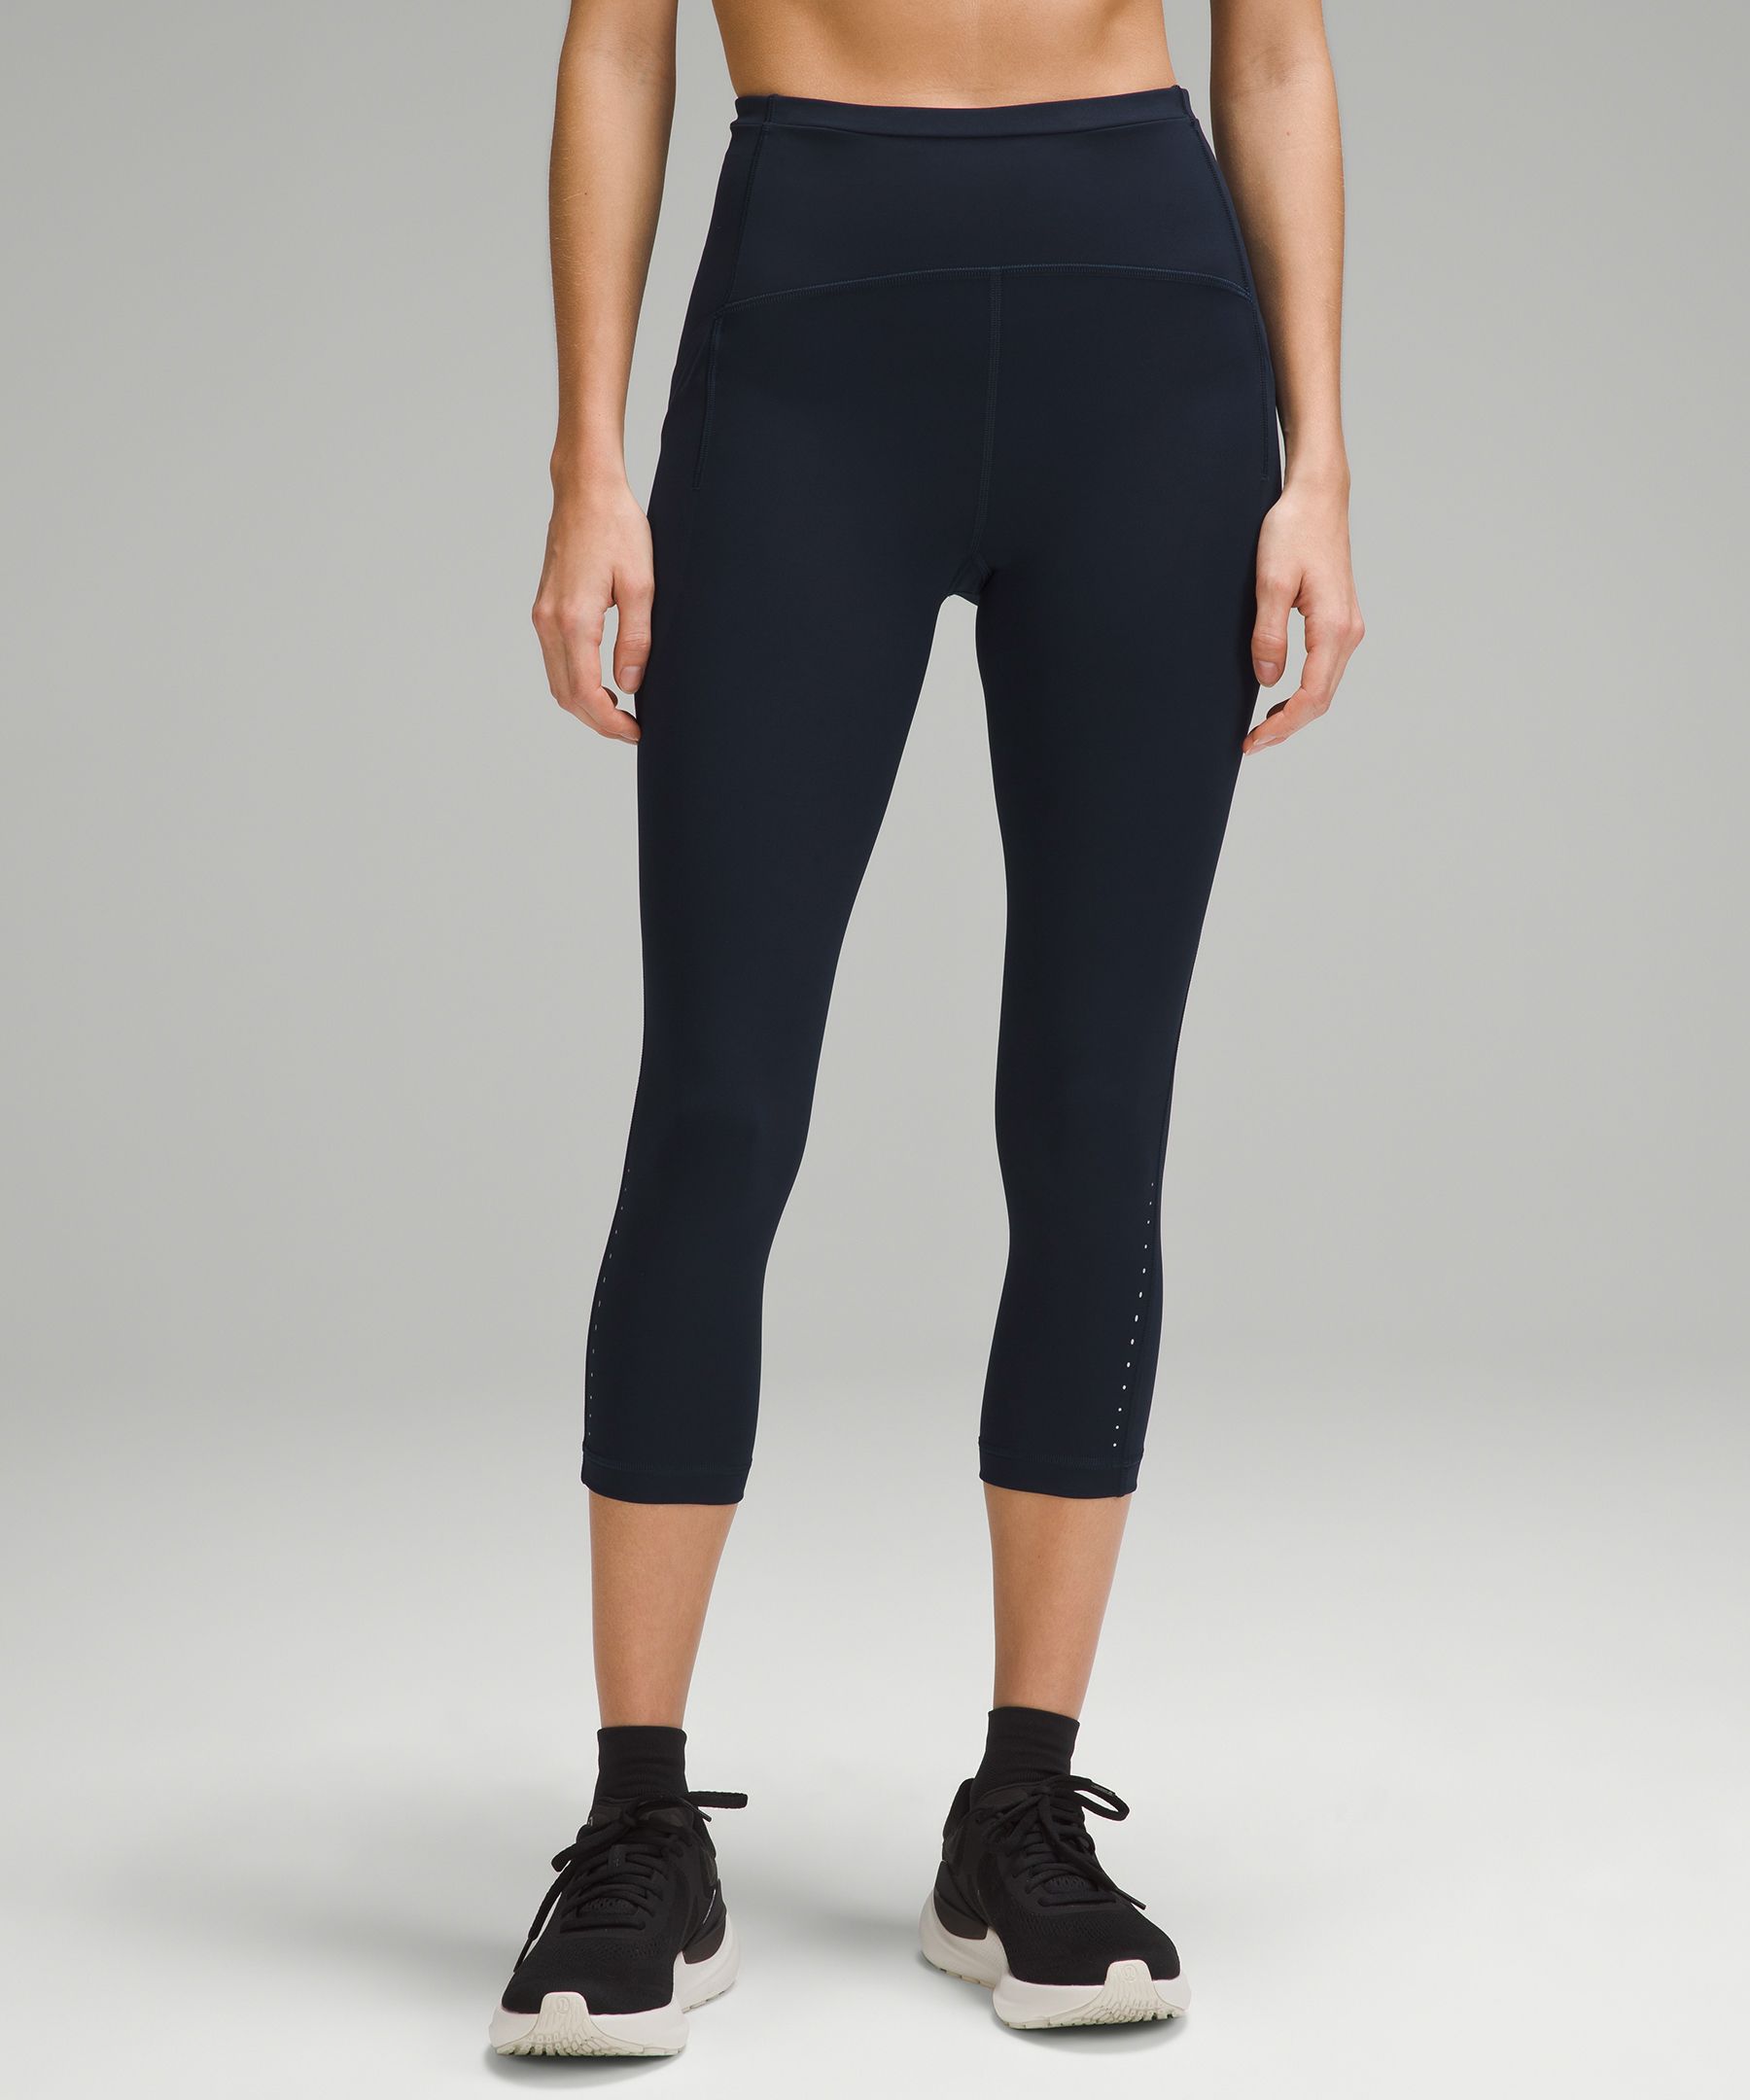 what to buy from lululemon